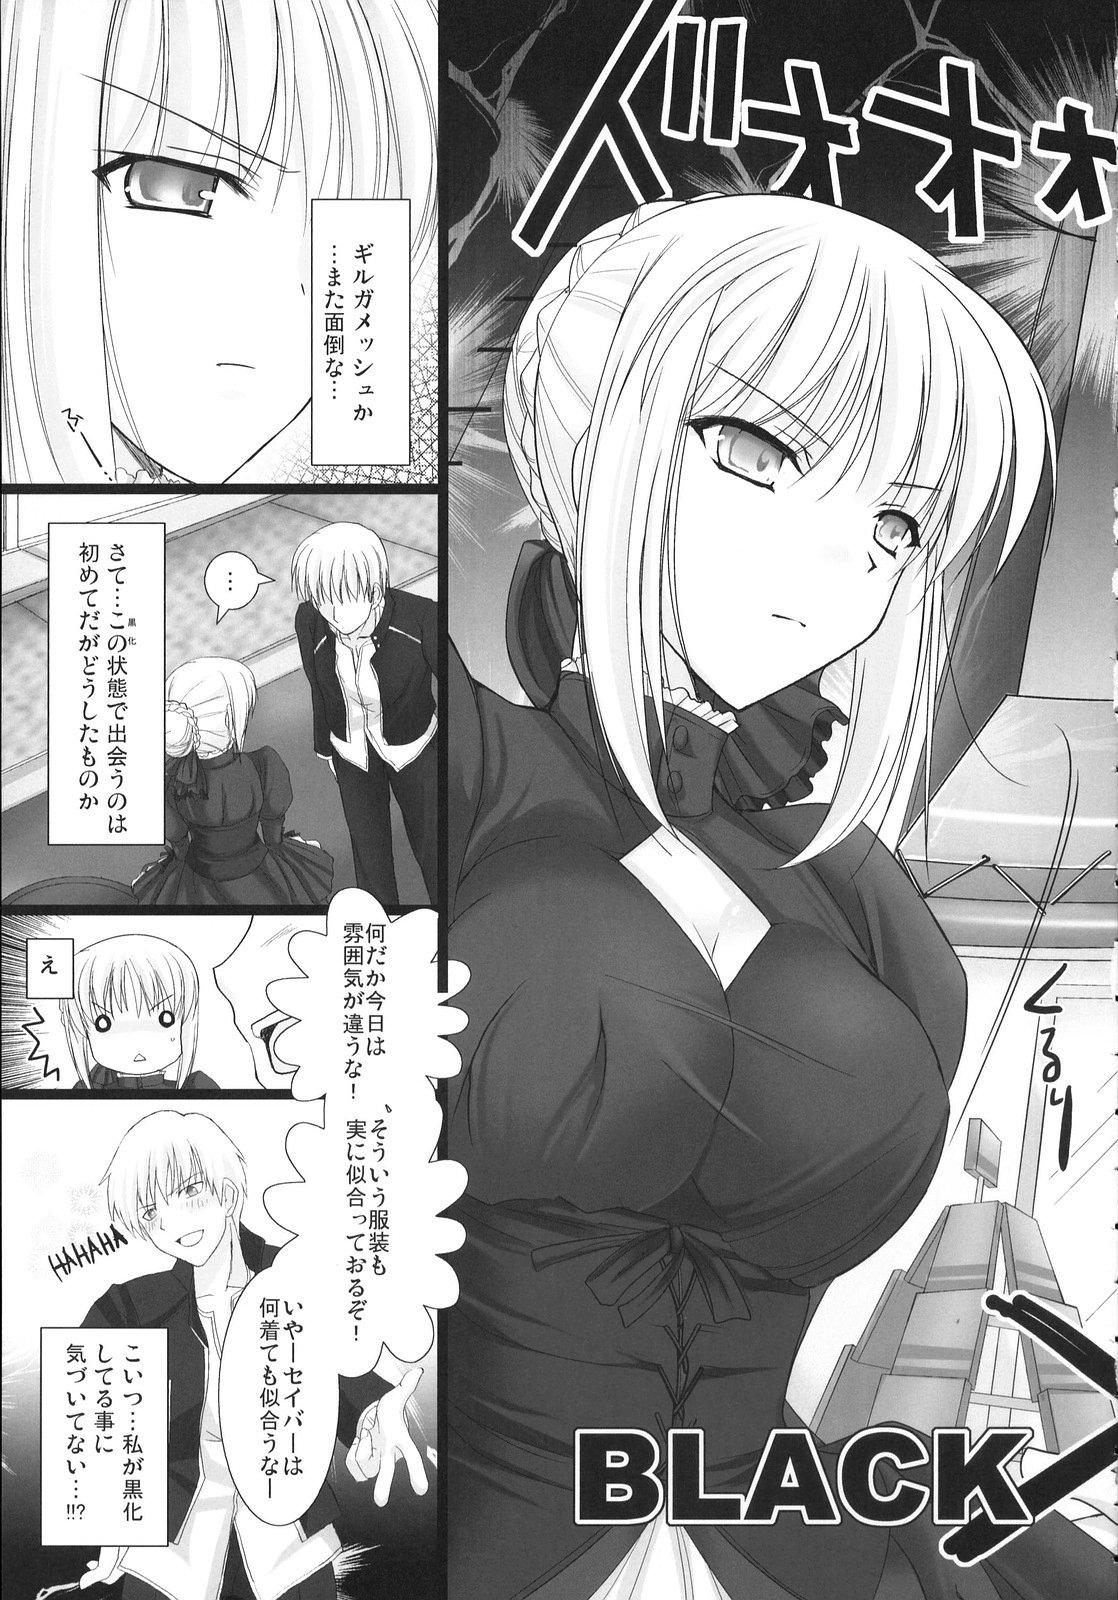 Pussylick BLACKxGOLD - Fate hollow ataraxia Friend - Page 7